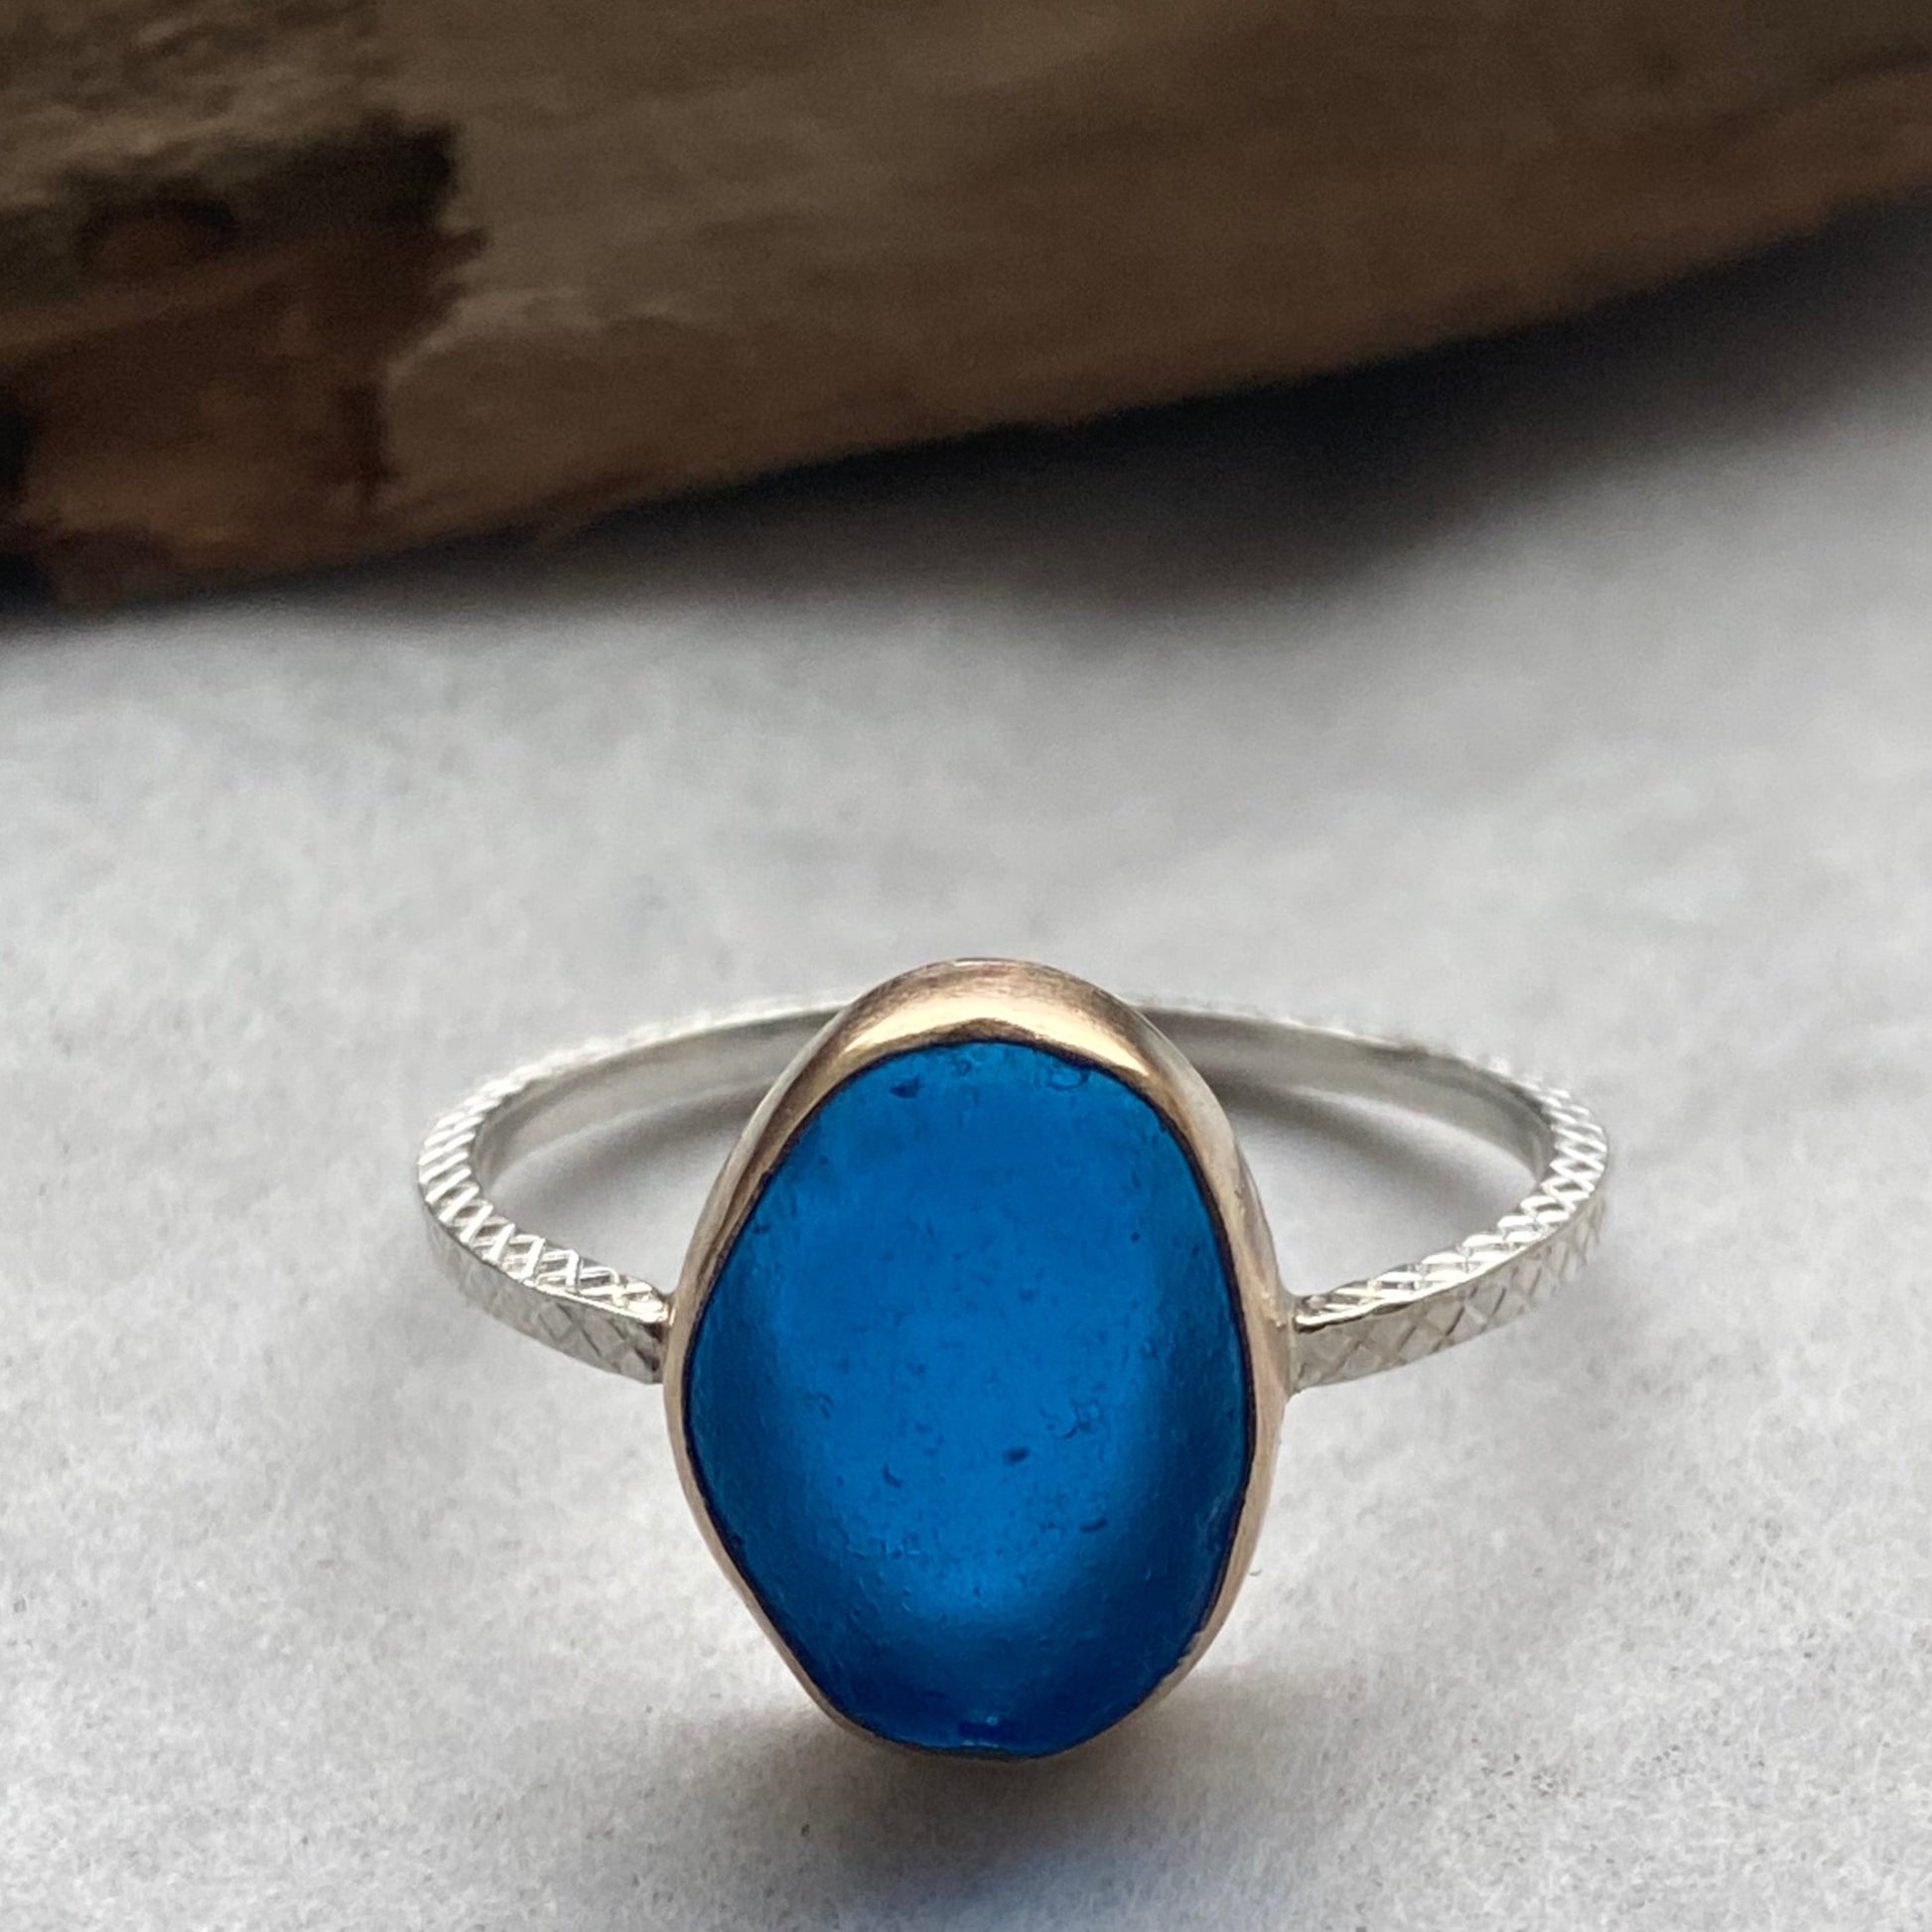 Bright Blue Sea Glass Ring with Gold Bezel